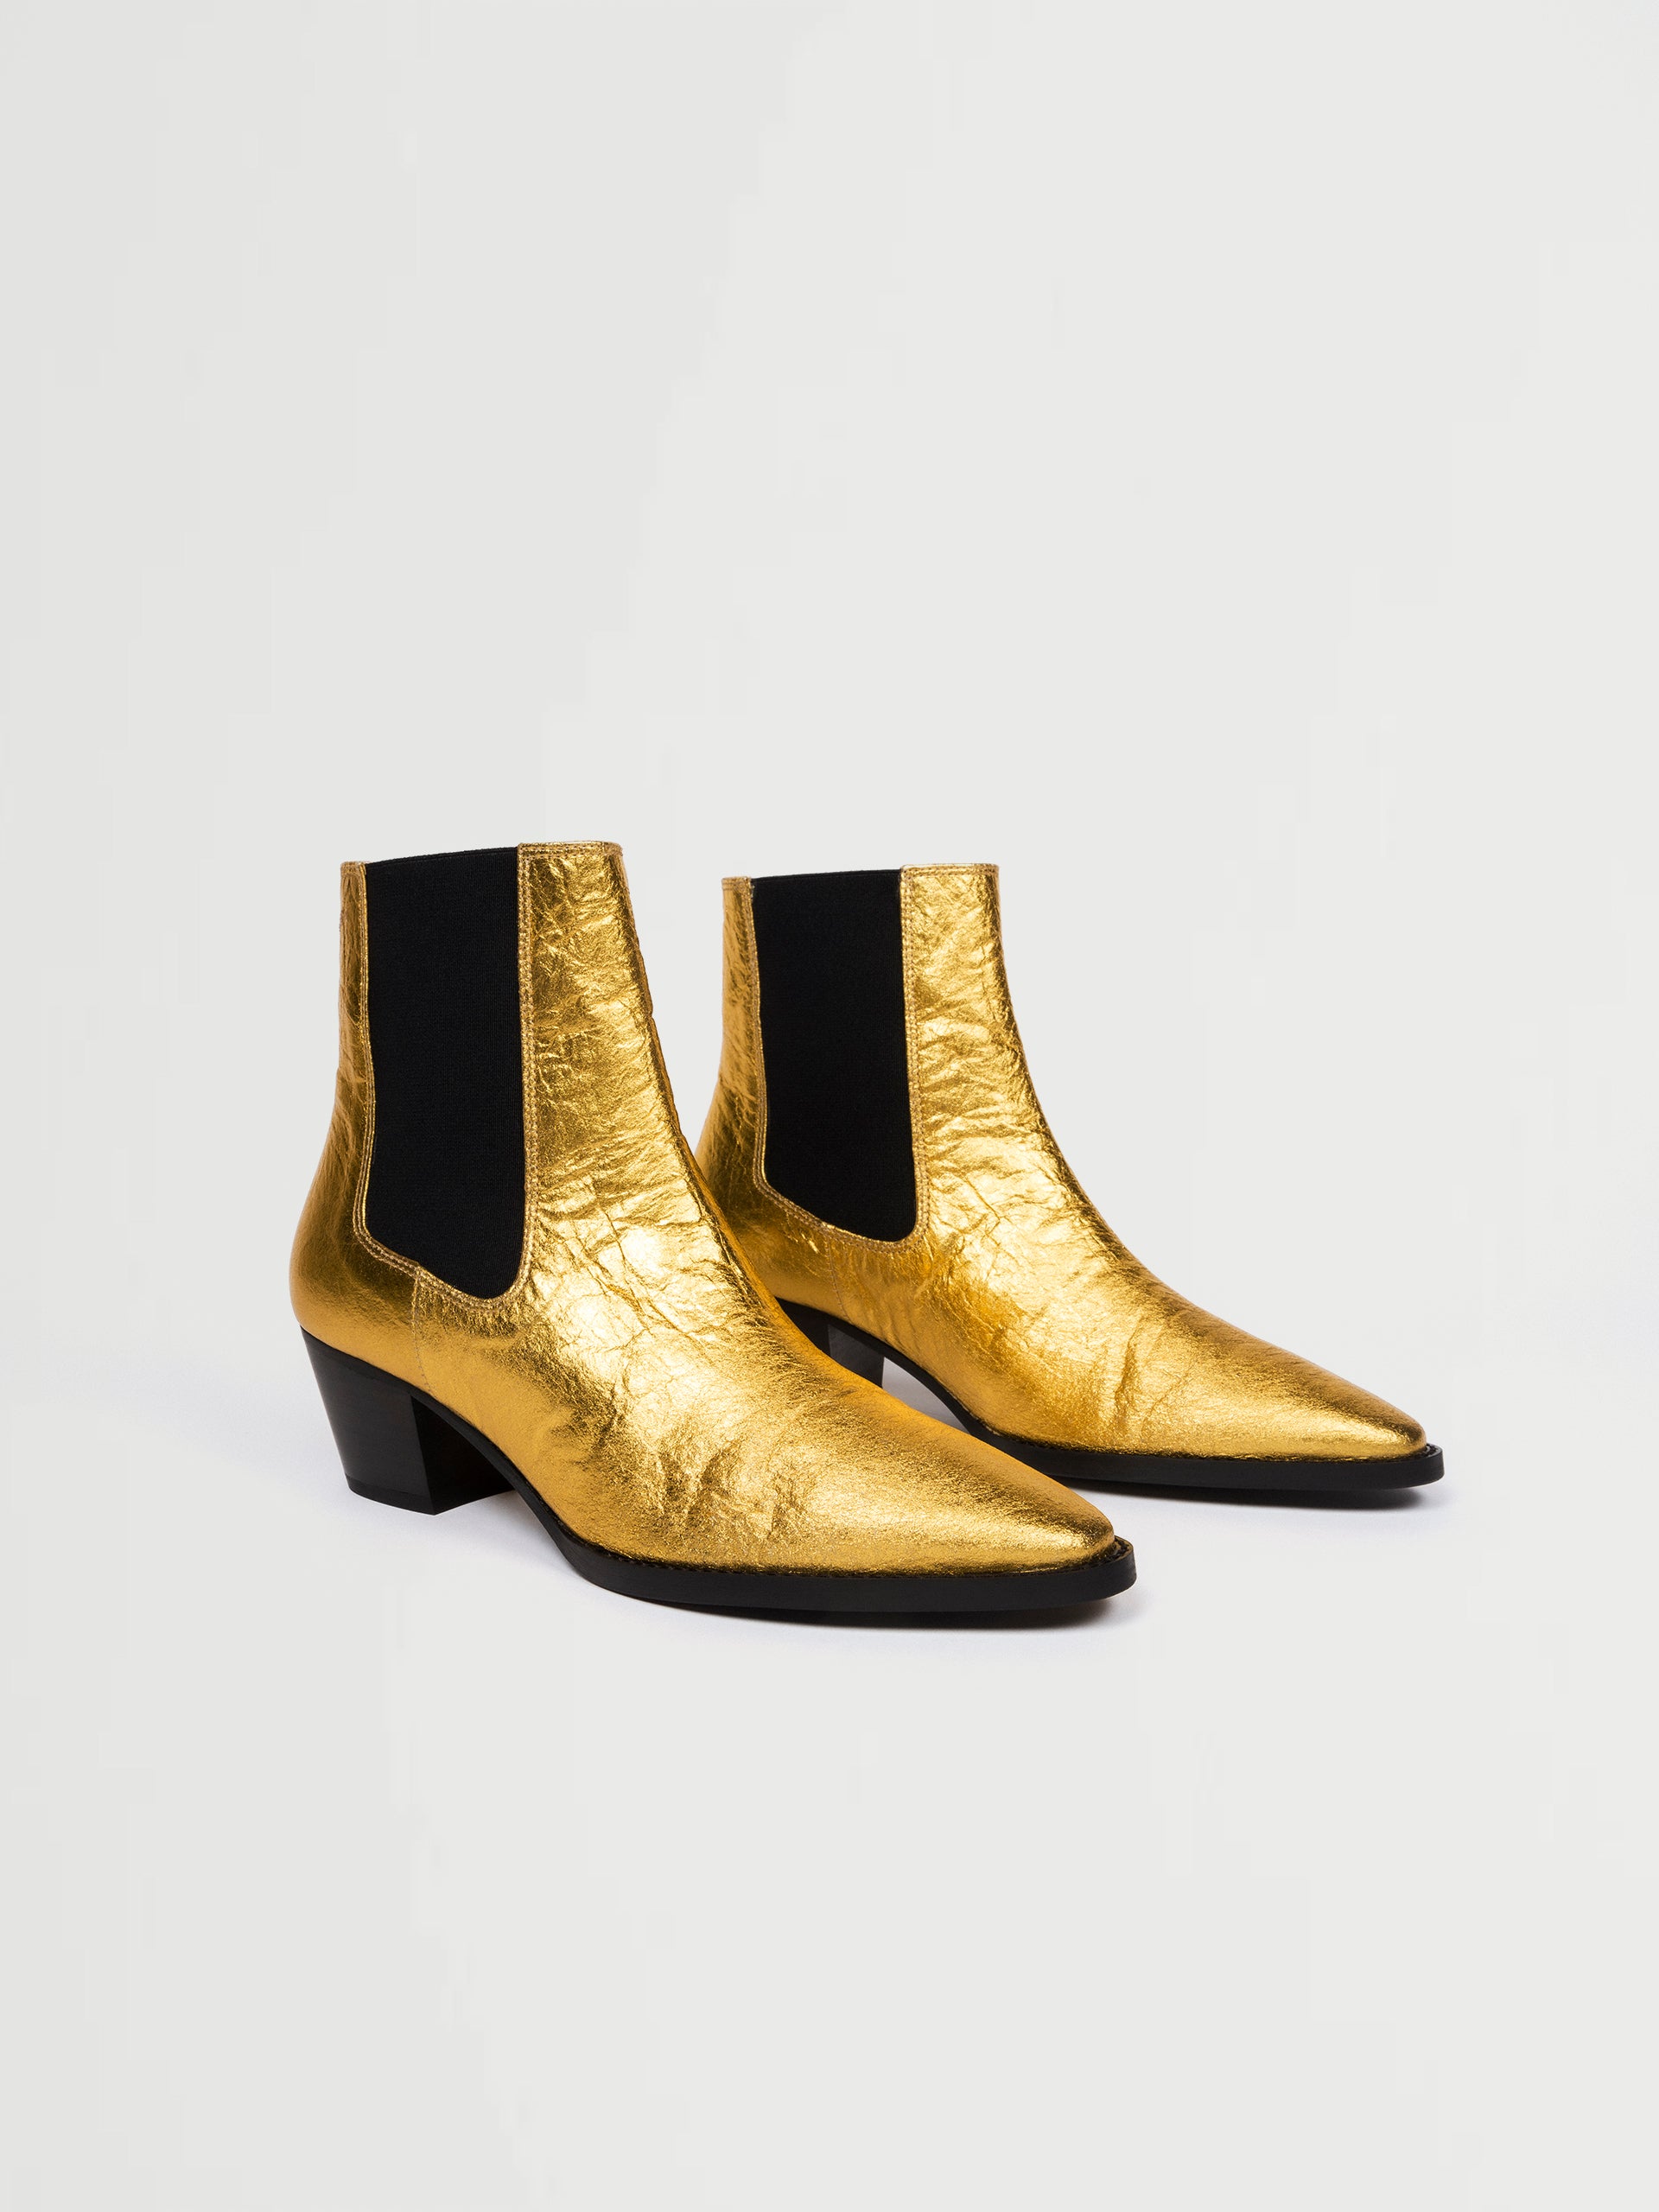 Gold vegan leather boots